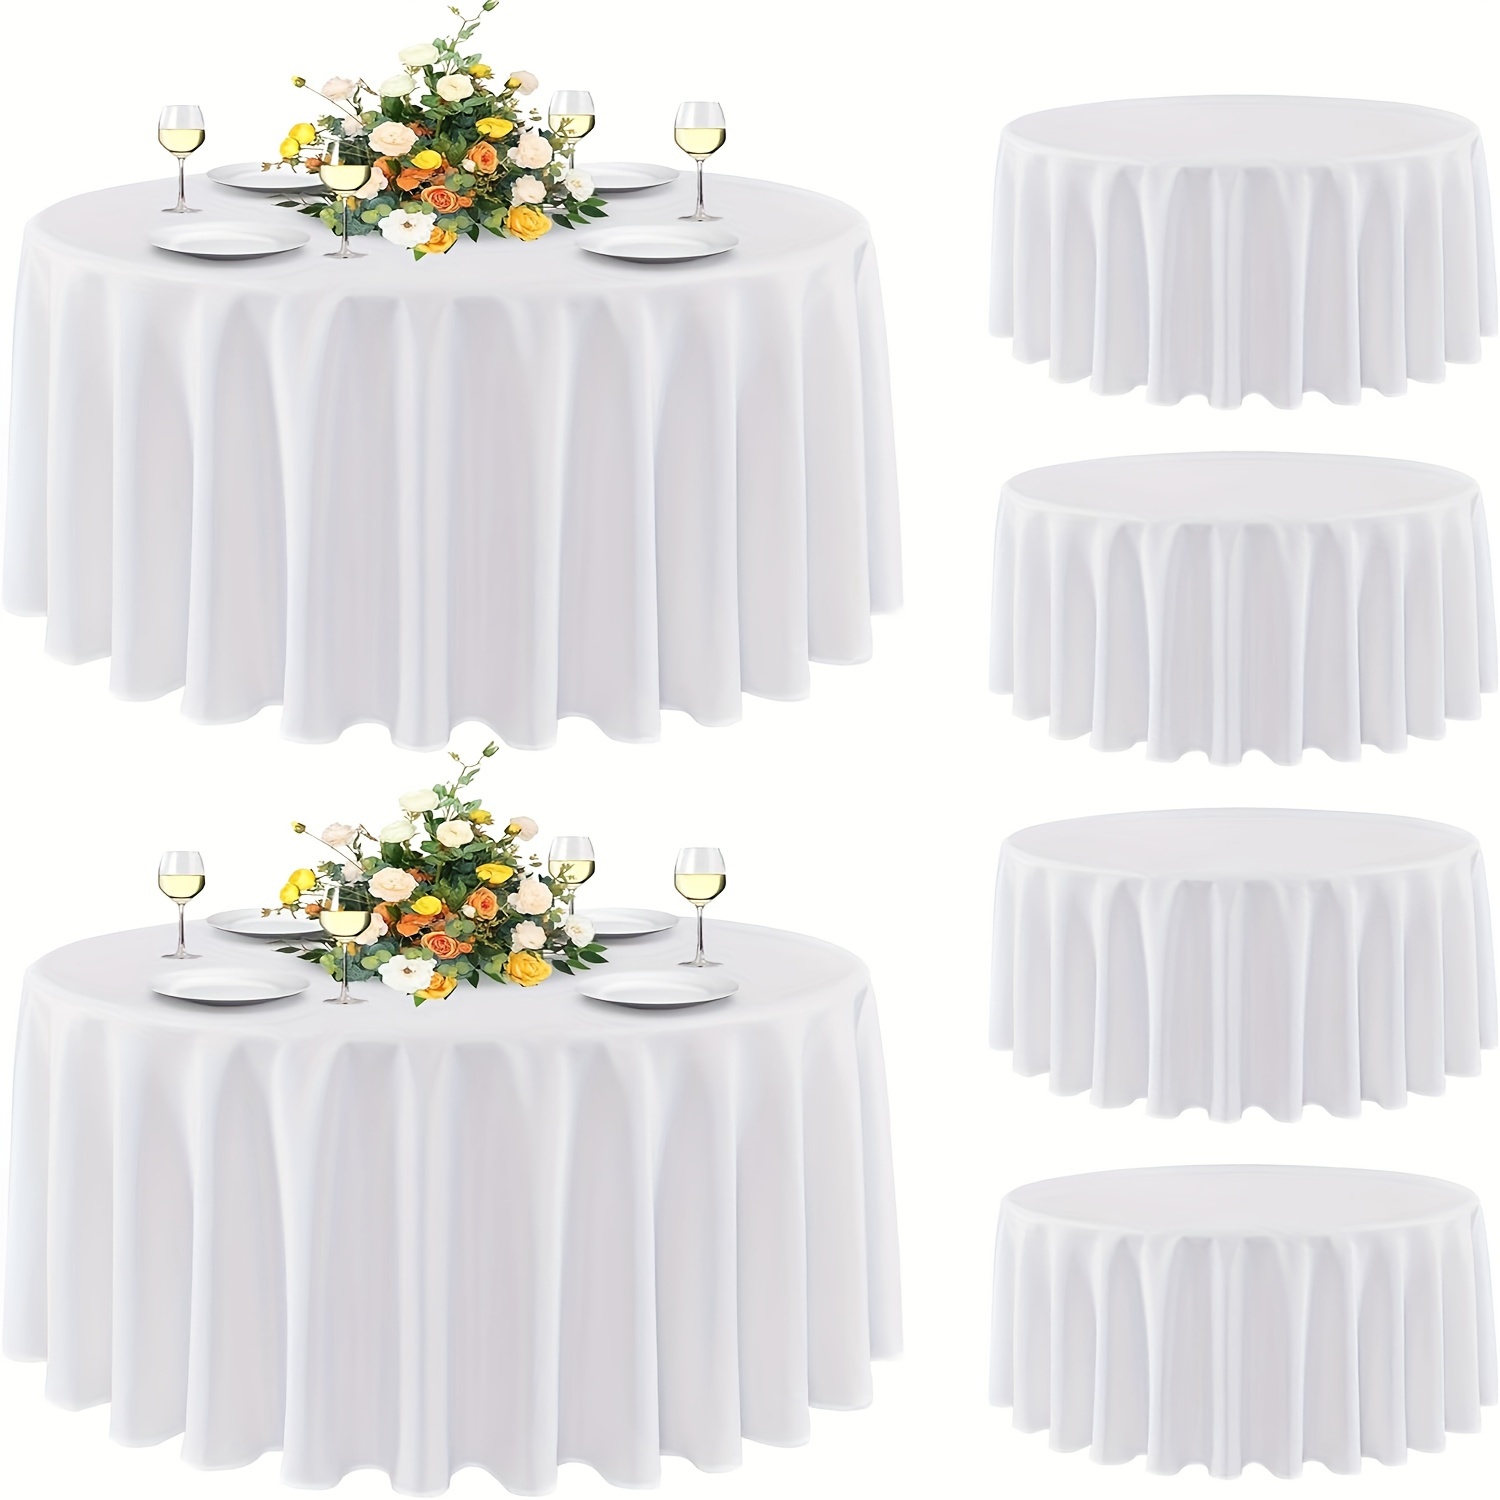 

6-piece Elegant Round Tablecloths - Washable Polyester, Perfect For Weddings, Banquets, Birthdays & Restaurants Transform Your Dining Experience